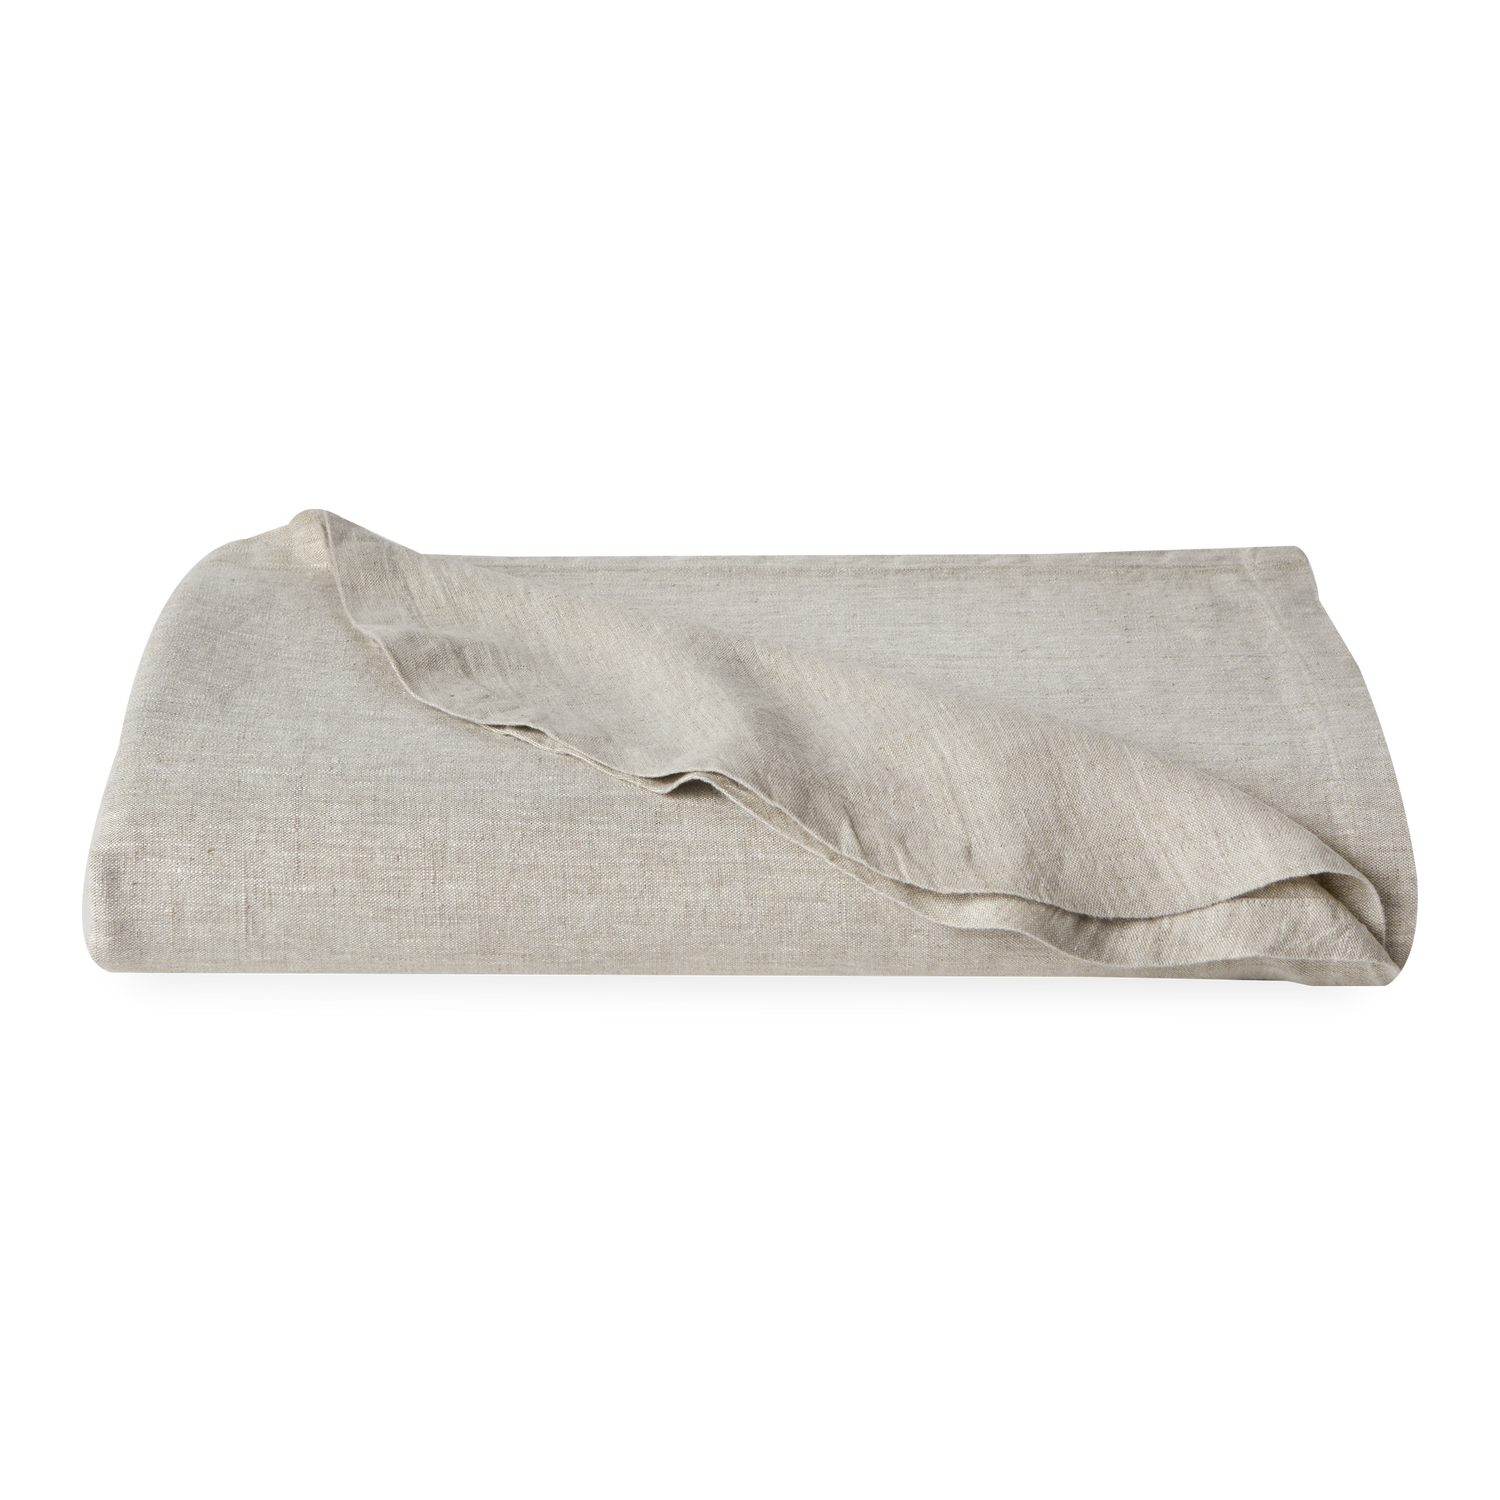 Made in Canada from European linen, the oversized Muse bedspread features a three-panel construction with rounded corners.